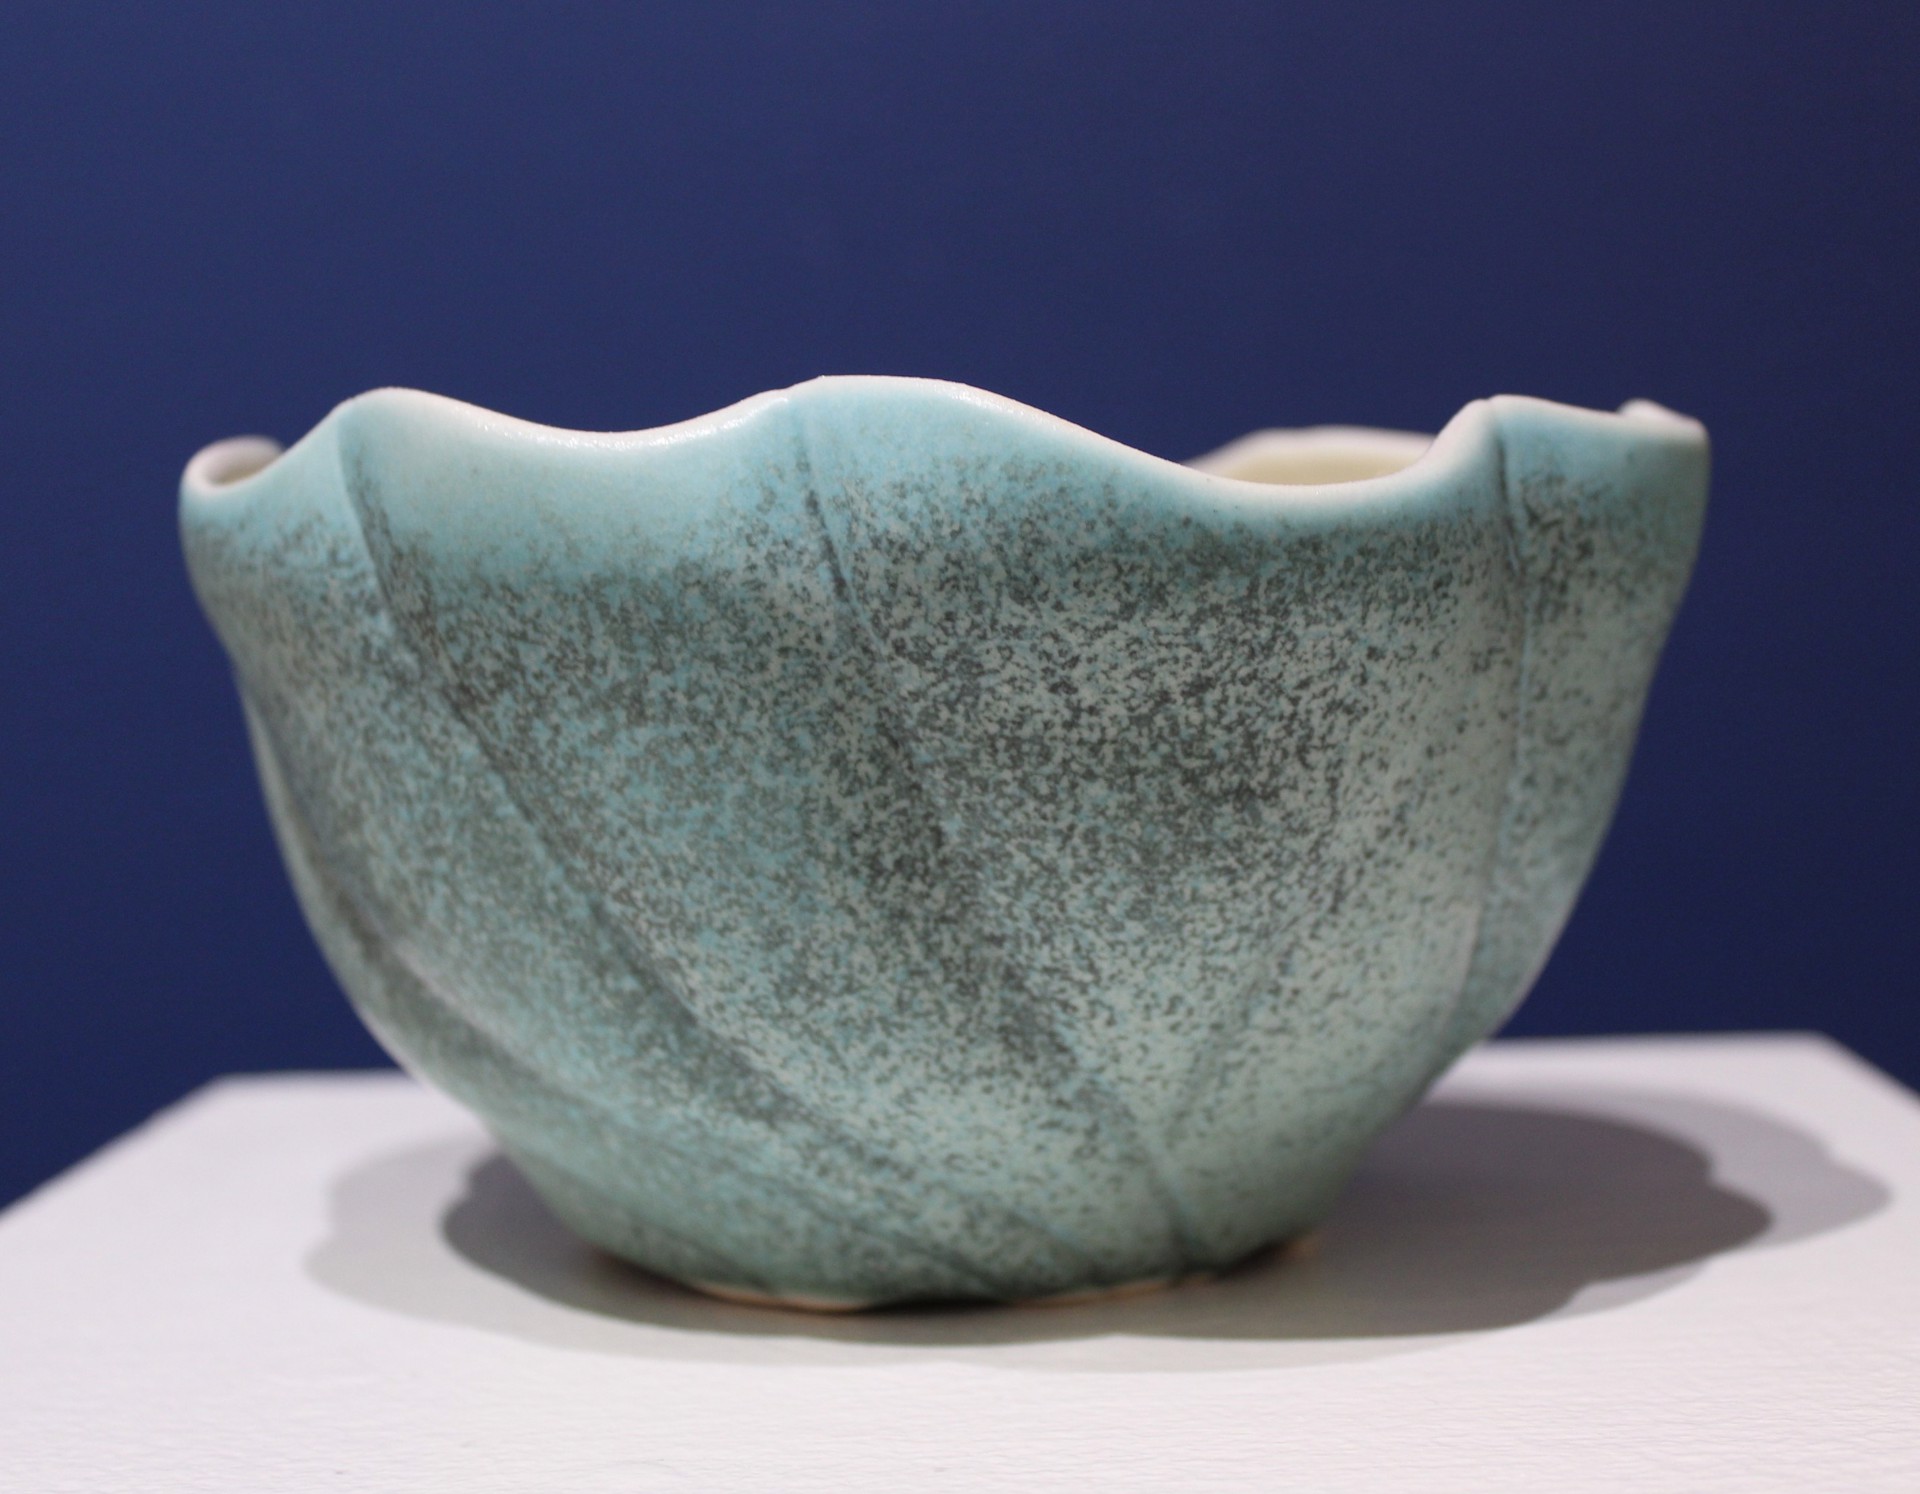 Blue Bowl (Scallop) by Danielle Inabinet